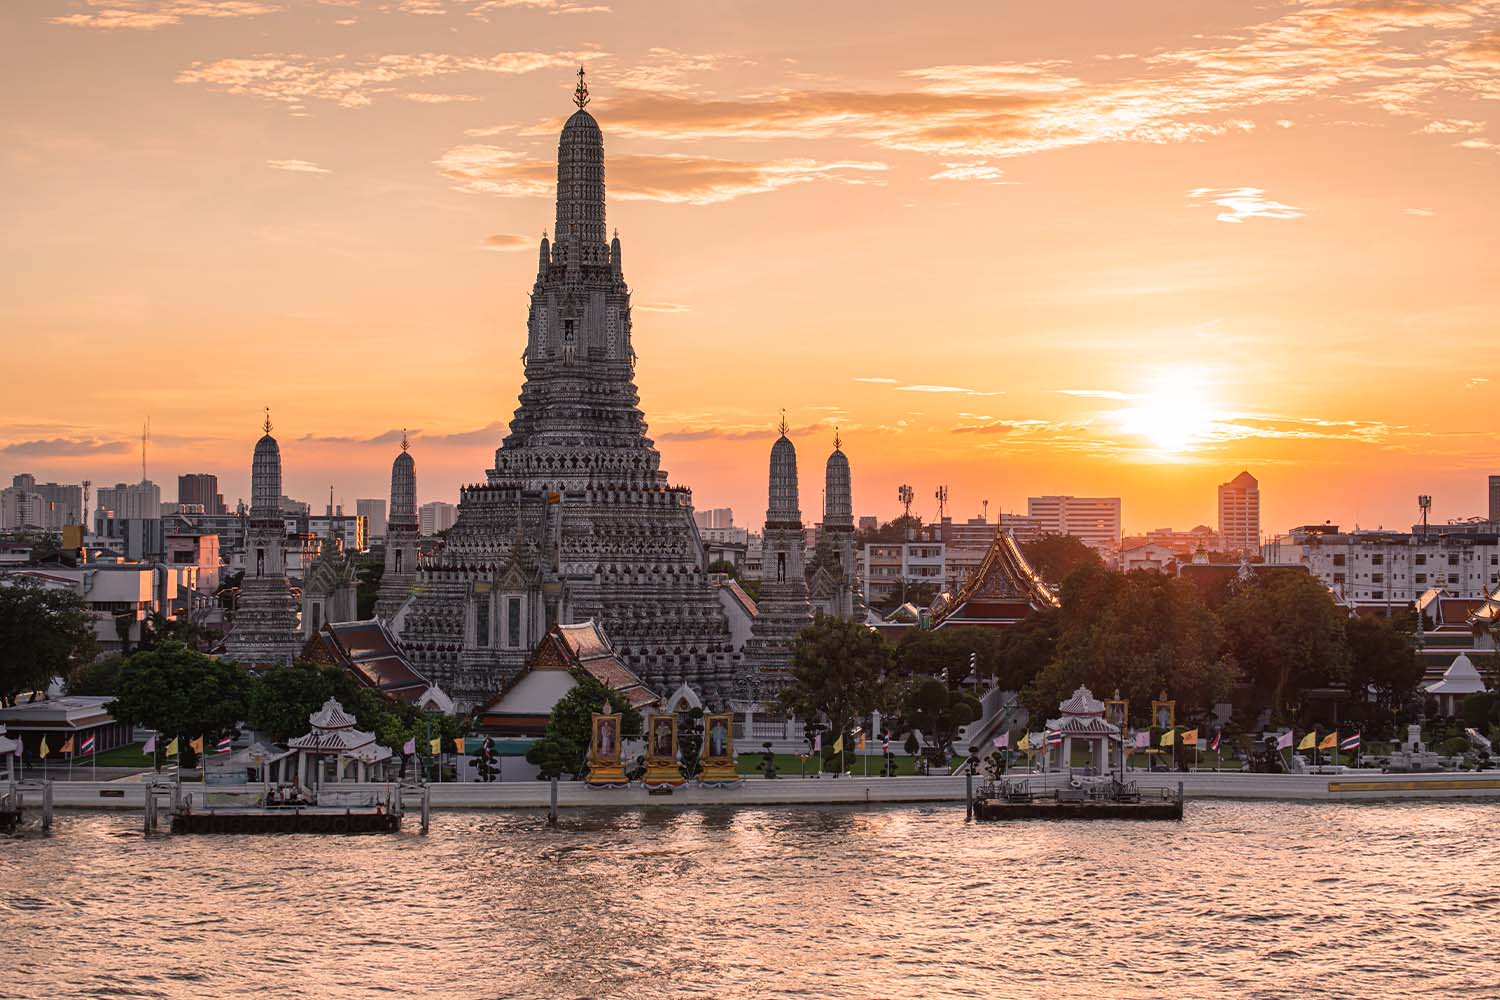 Sunset over Wat Arun Ratchawararam temple on the Chao Phraya river, illuminated by artificial lighting, elevated point of view. Bangkok, Thailand